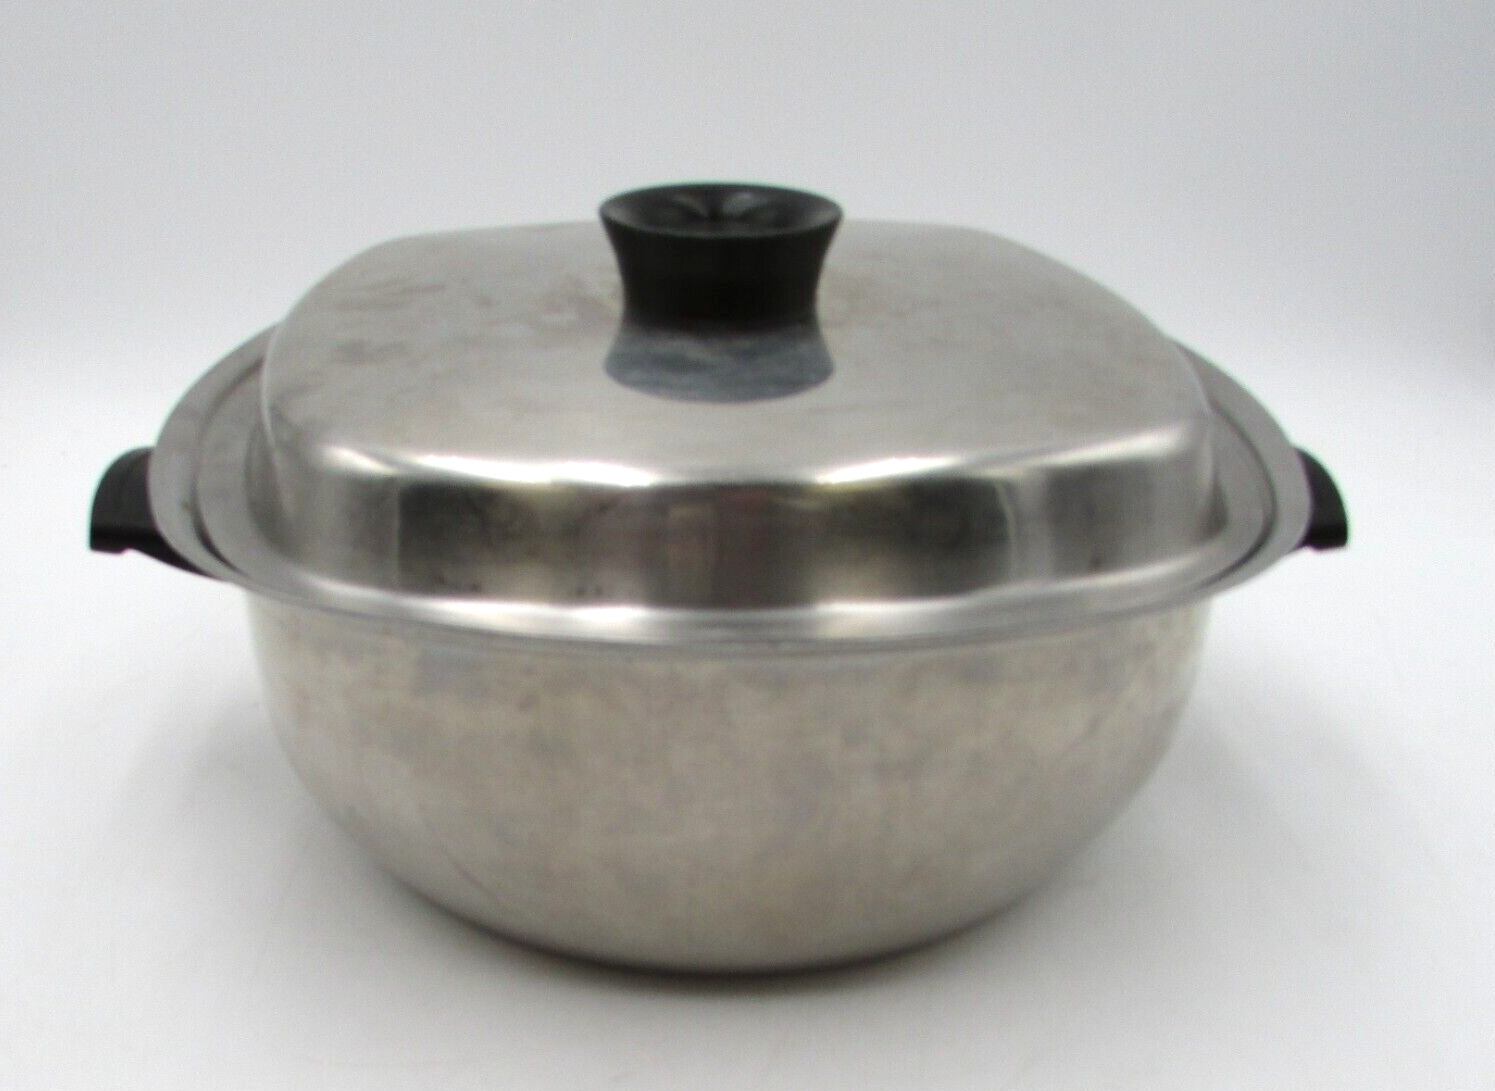 Aristo Craft West Bend Vintage Stainless 12 Inch Square Stock Pot & Lid